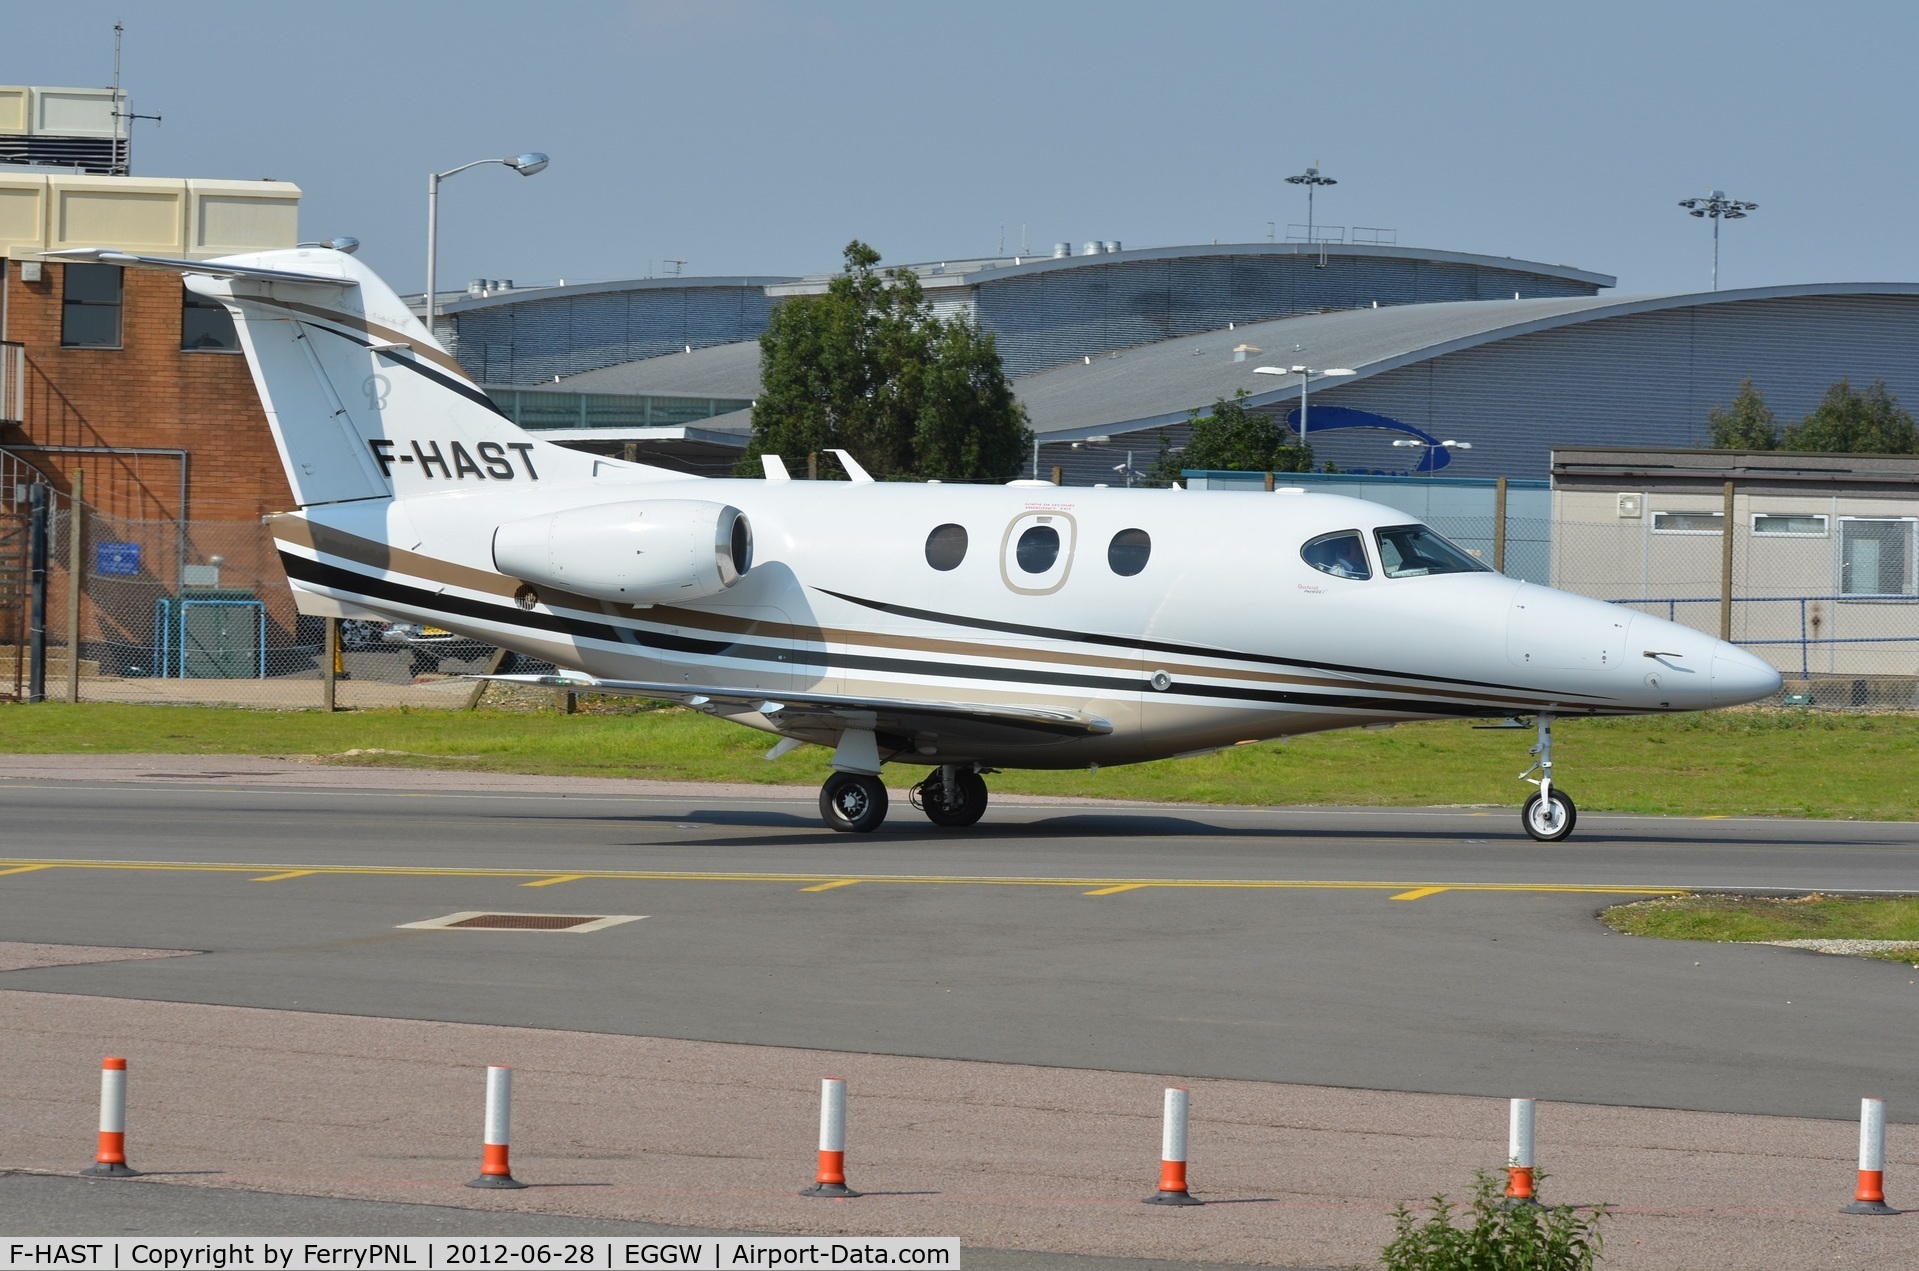 F-HAST, 2006 Raytheon 390 Premier IA C/N RB-149, Quick visit in Luton this afternoon.